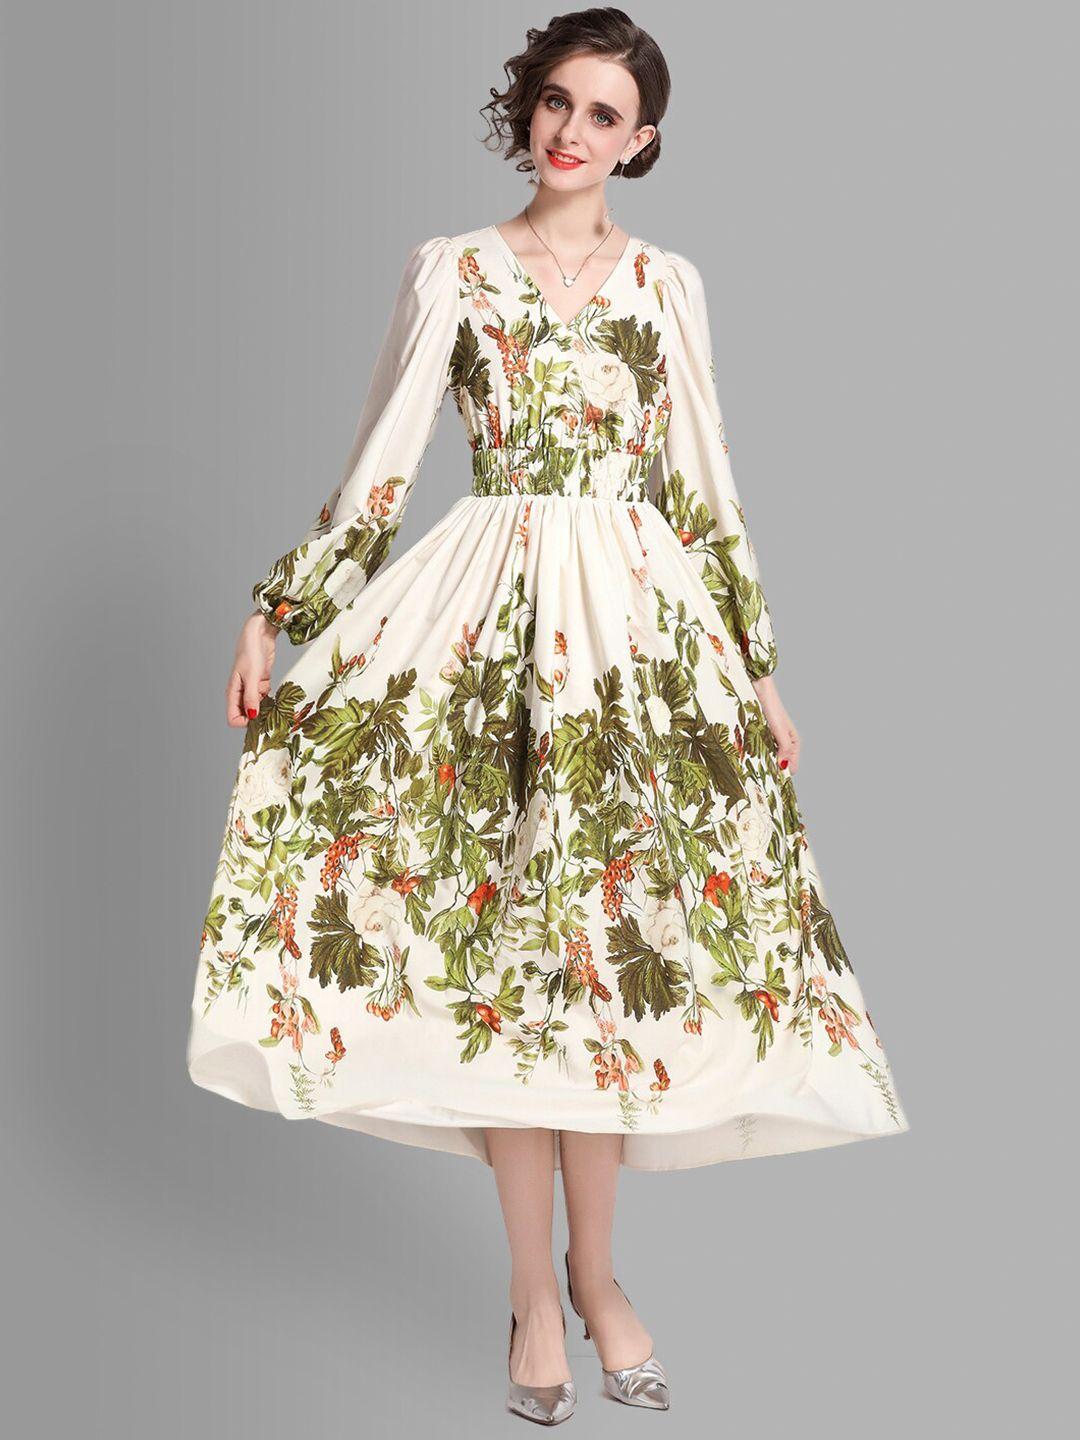 jc collection off white & green floral printed midi dress